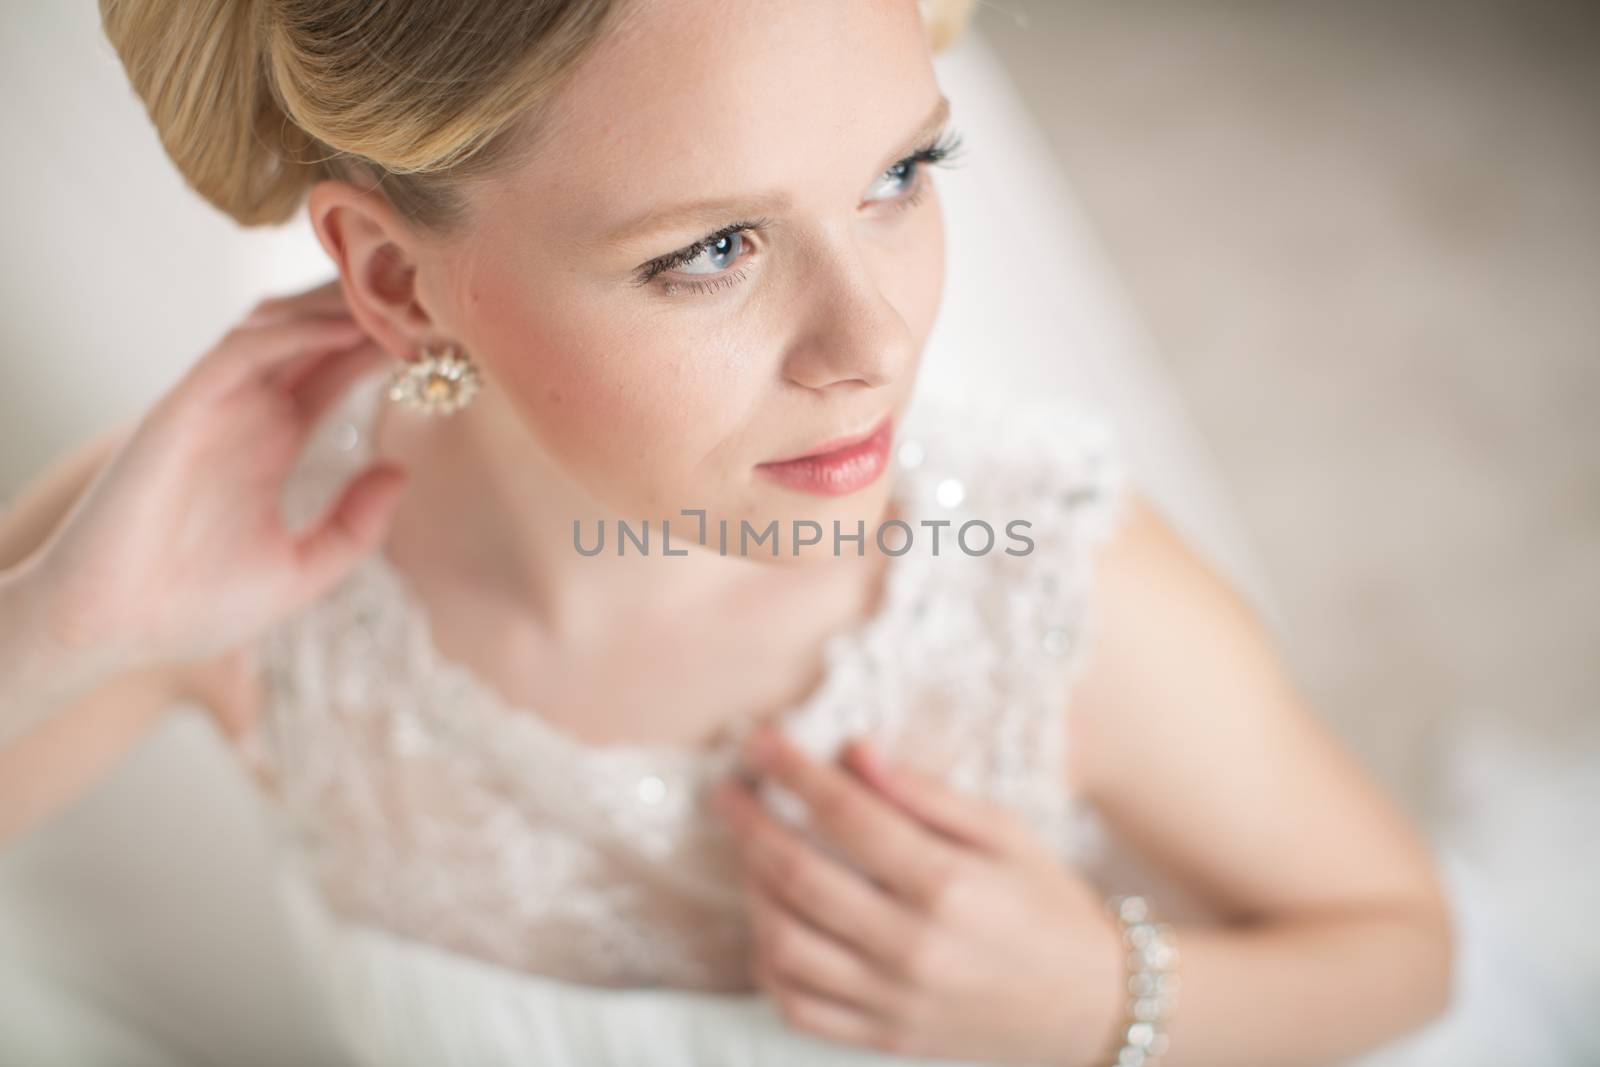 Gorgeous bride on her wedding day (color toned image; shallow DOF)